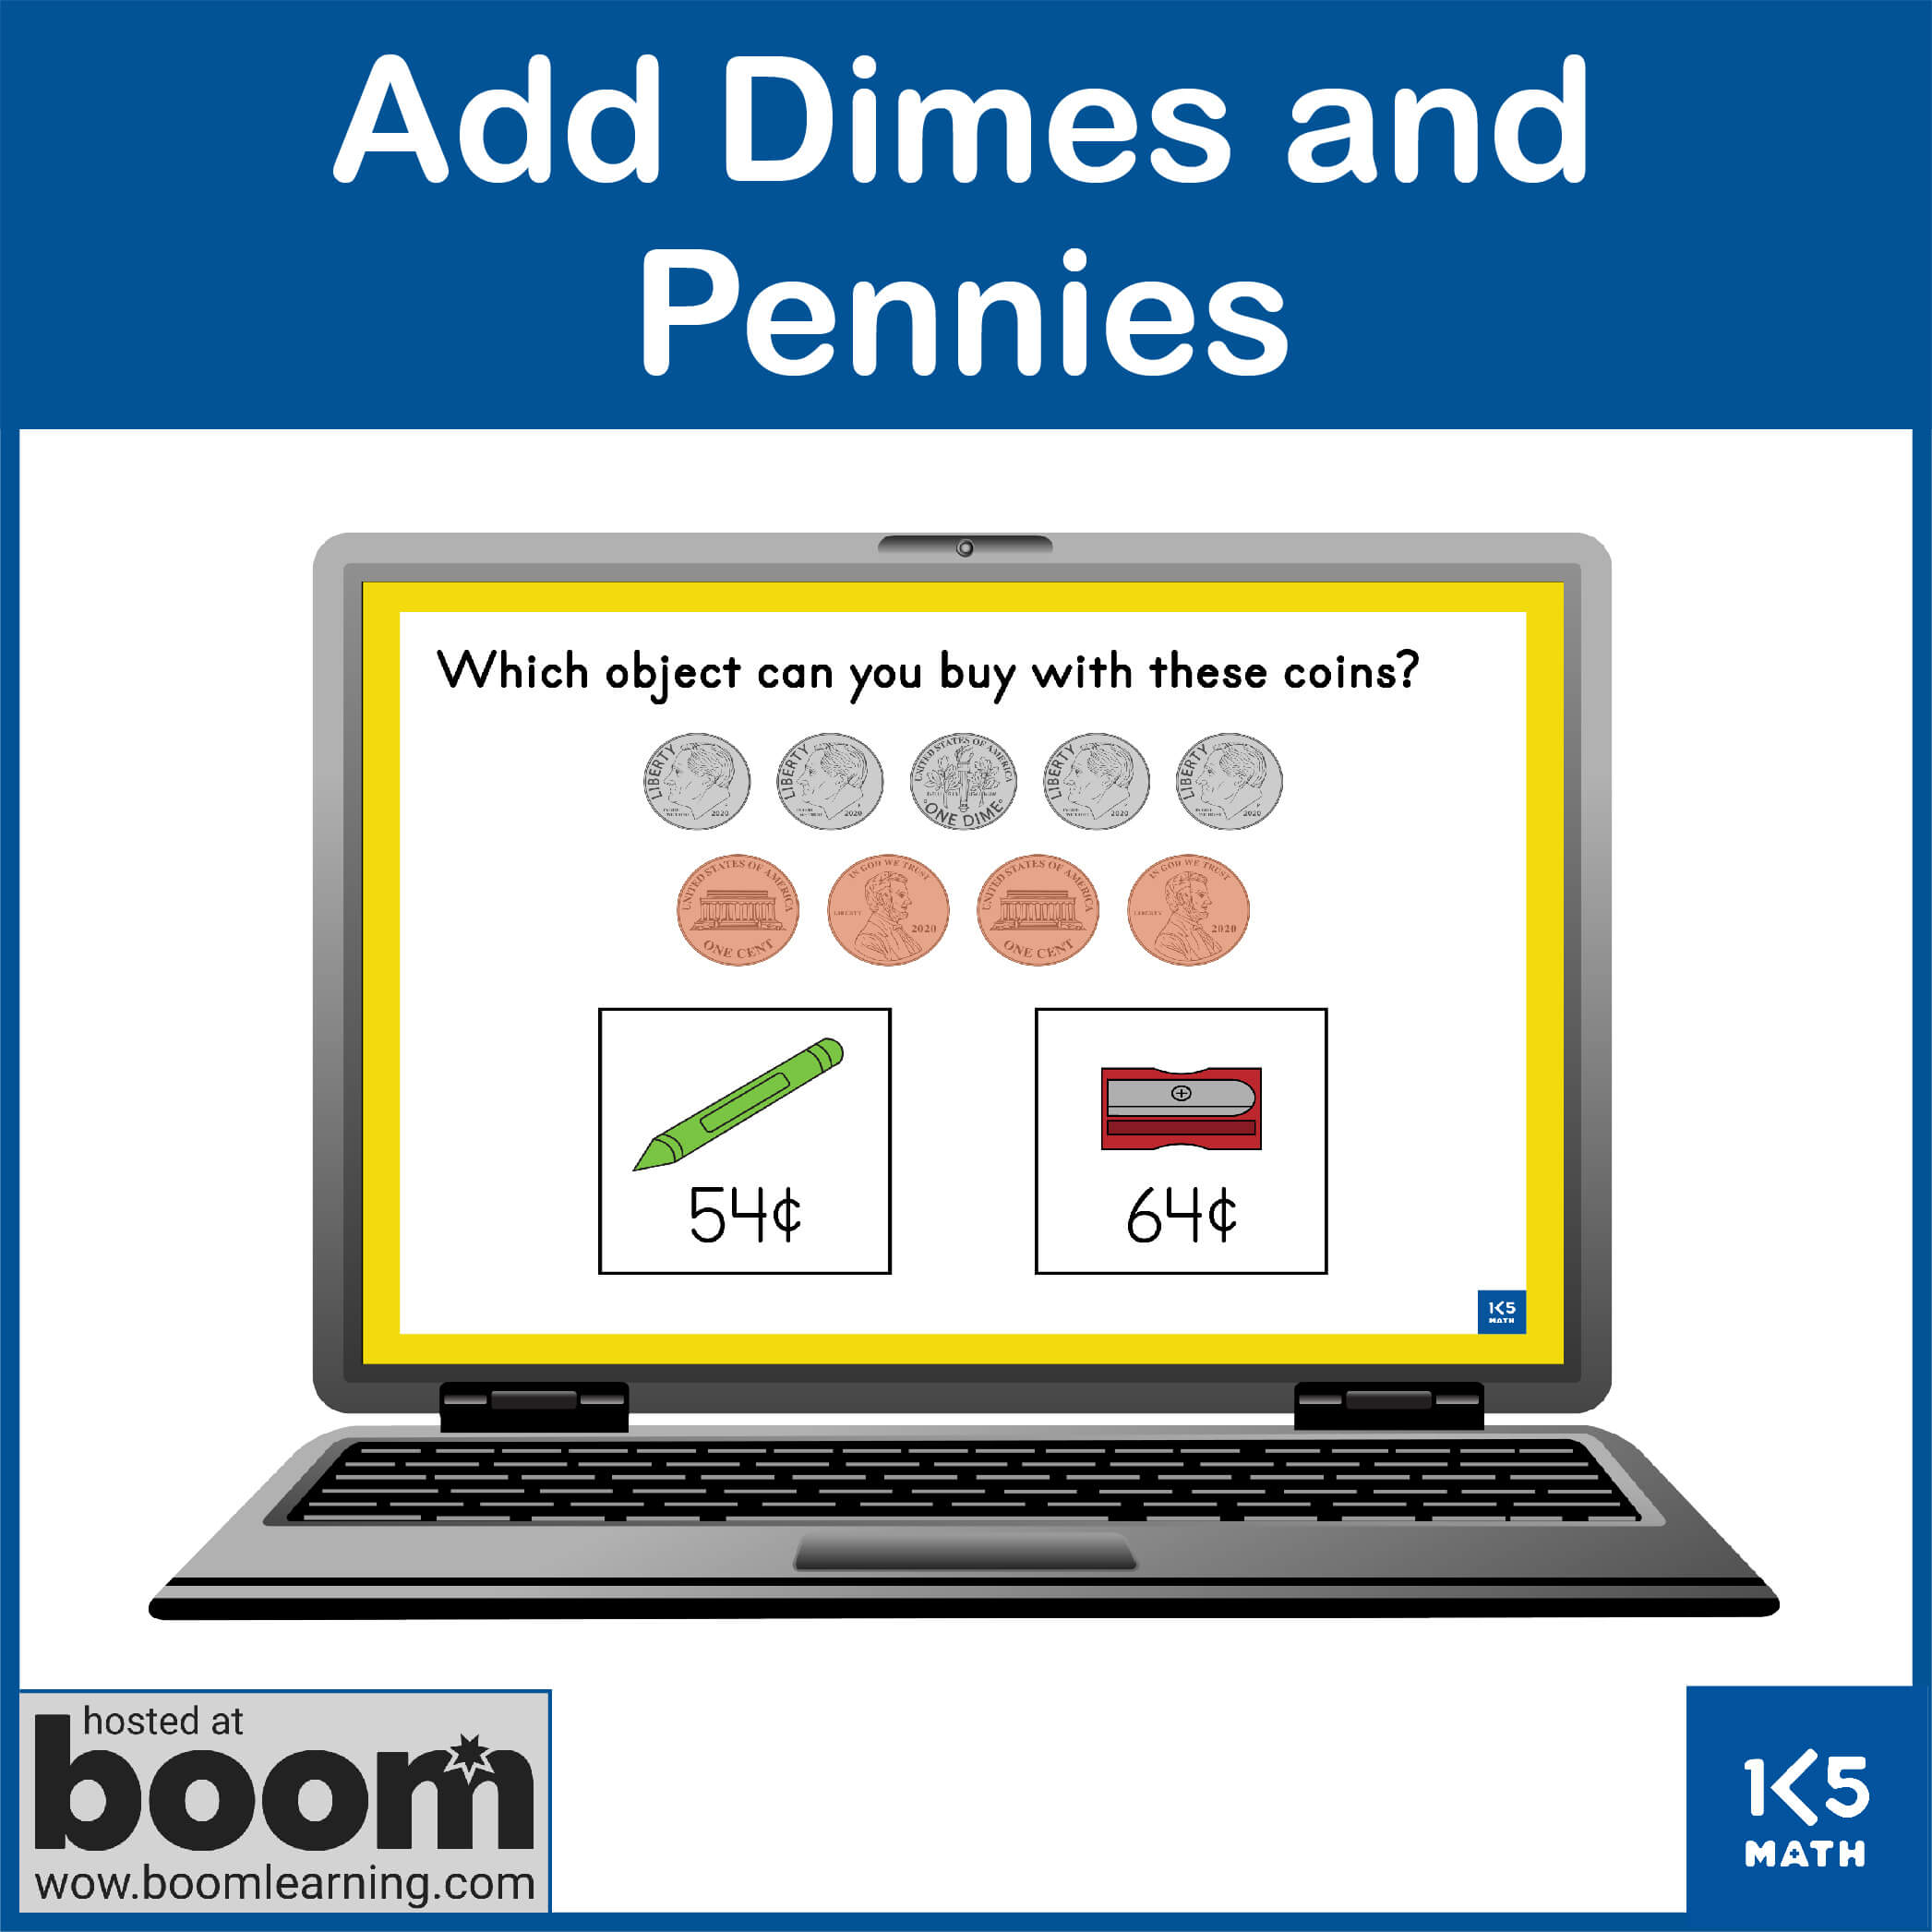 Boom Cards: Add Dimes and Pennies